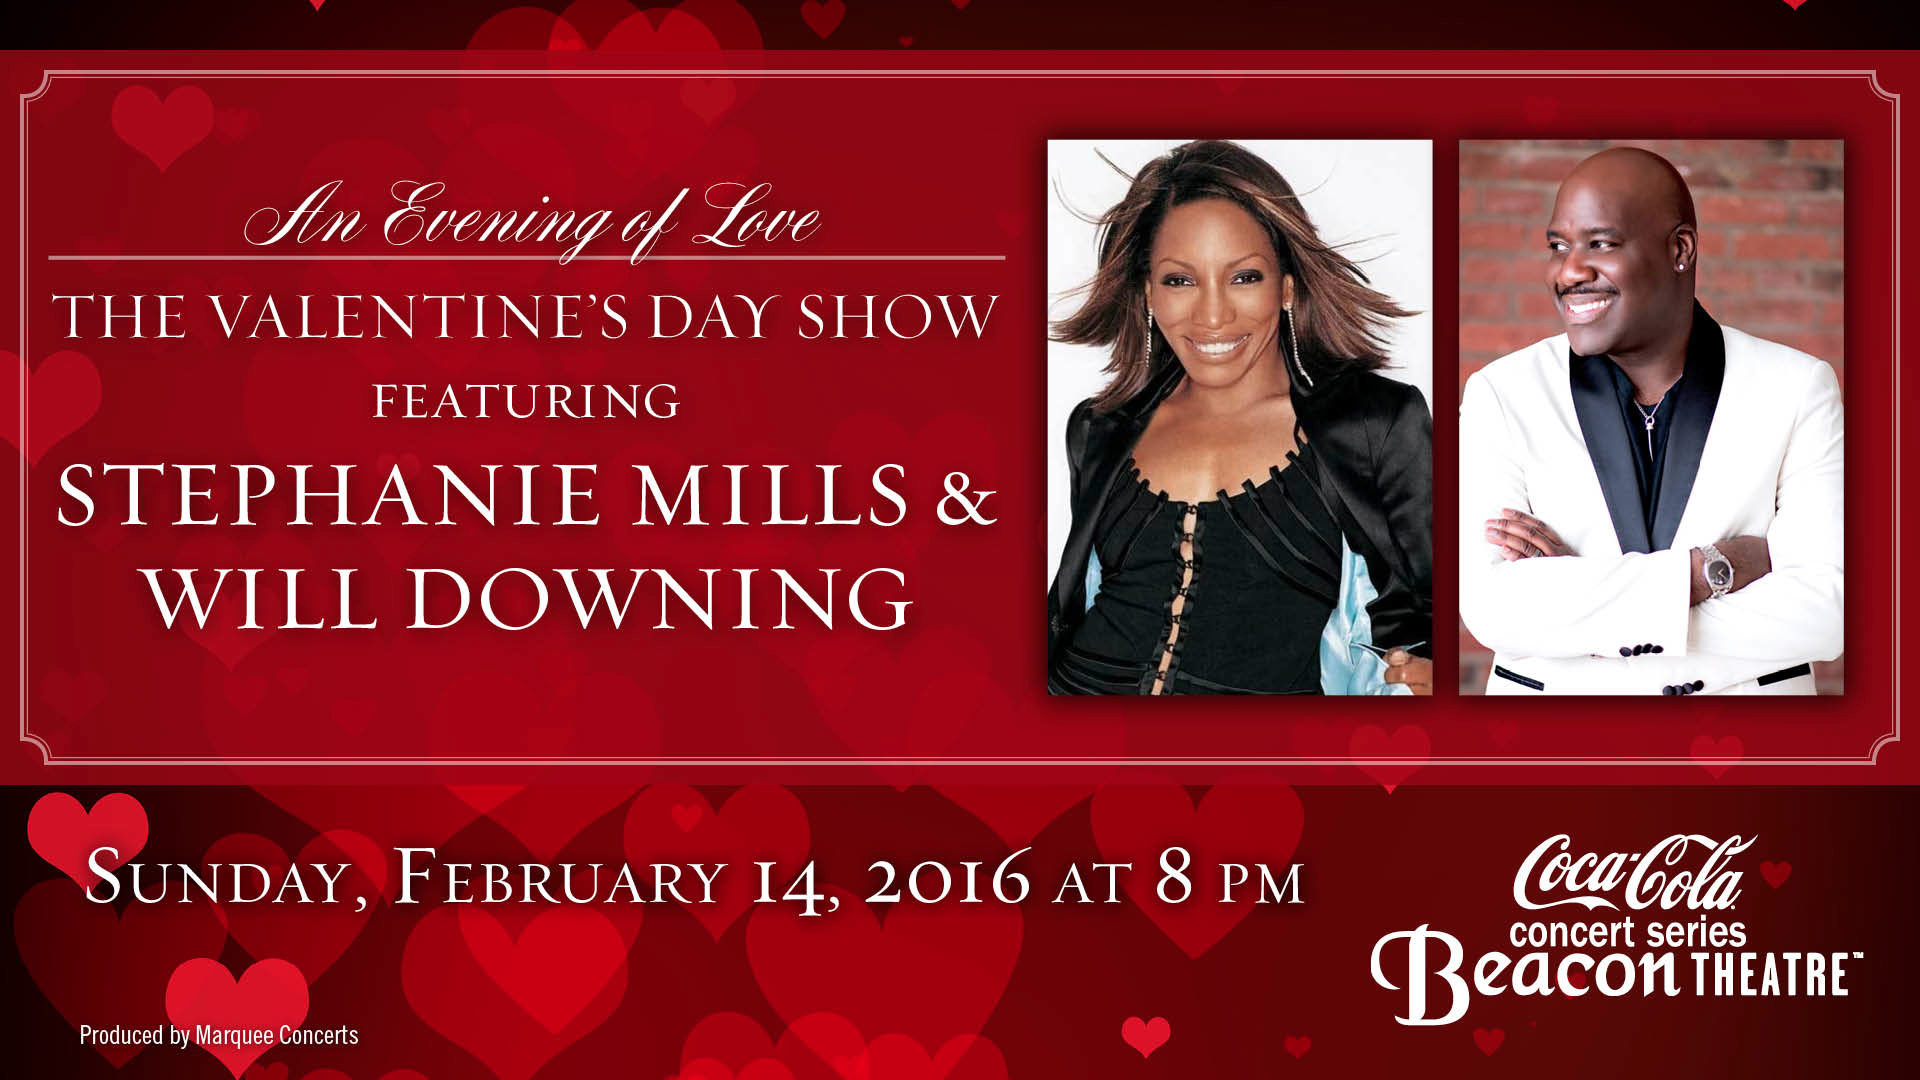 Stephanie Mills & Will Dowining appear in An Evening of Love: The Valentine's Day Show at the Beacon Theatre in Manhattan.